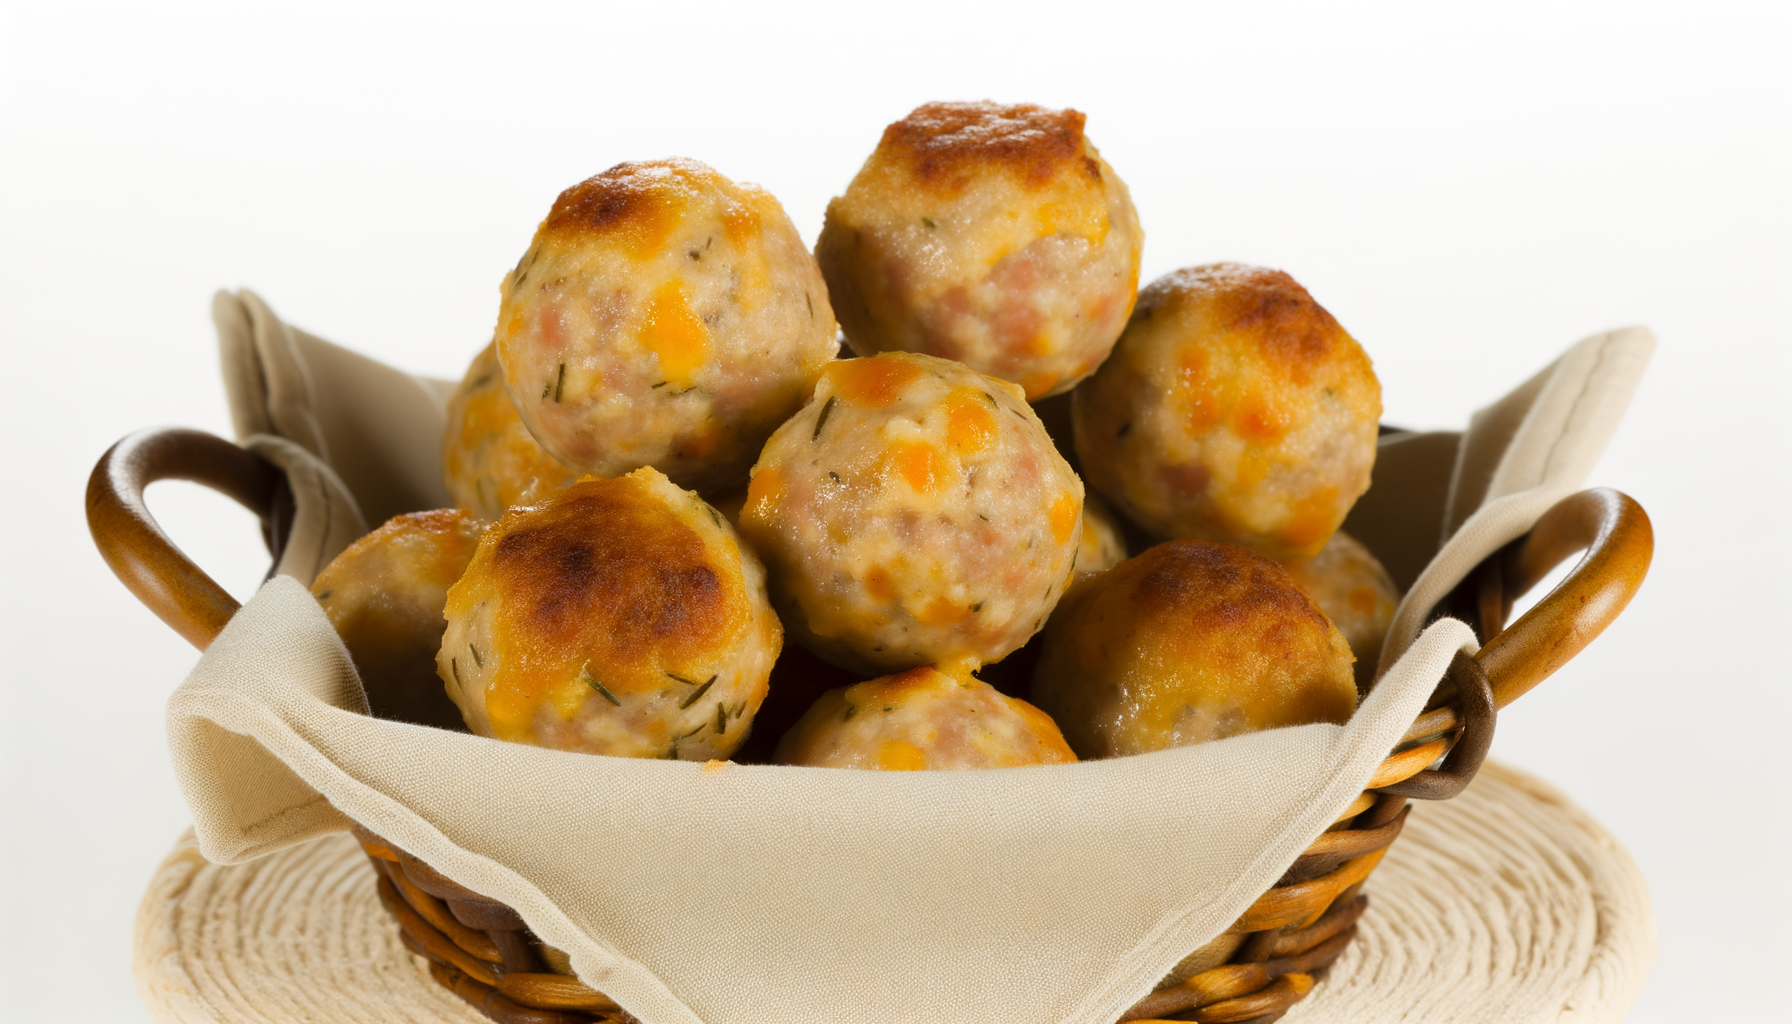 Golden sausage balls in a rustic basket with a sheen of grease